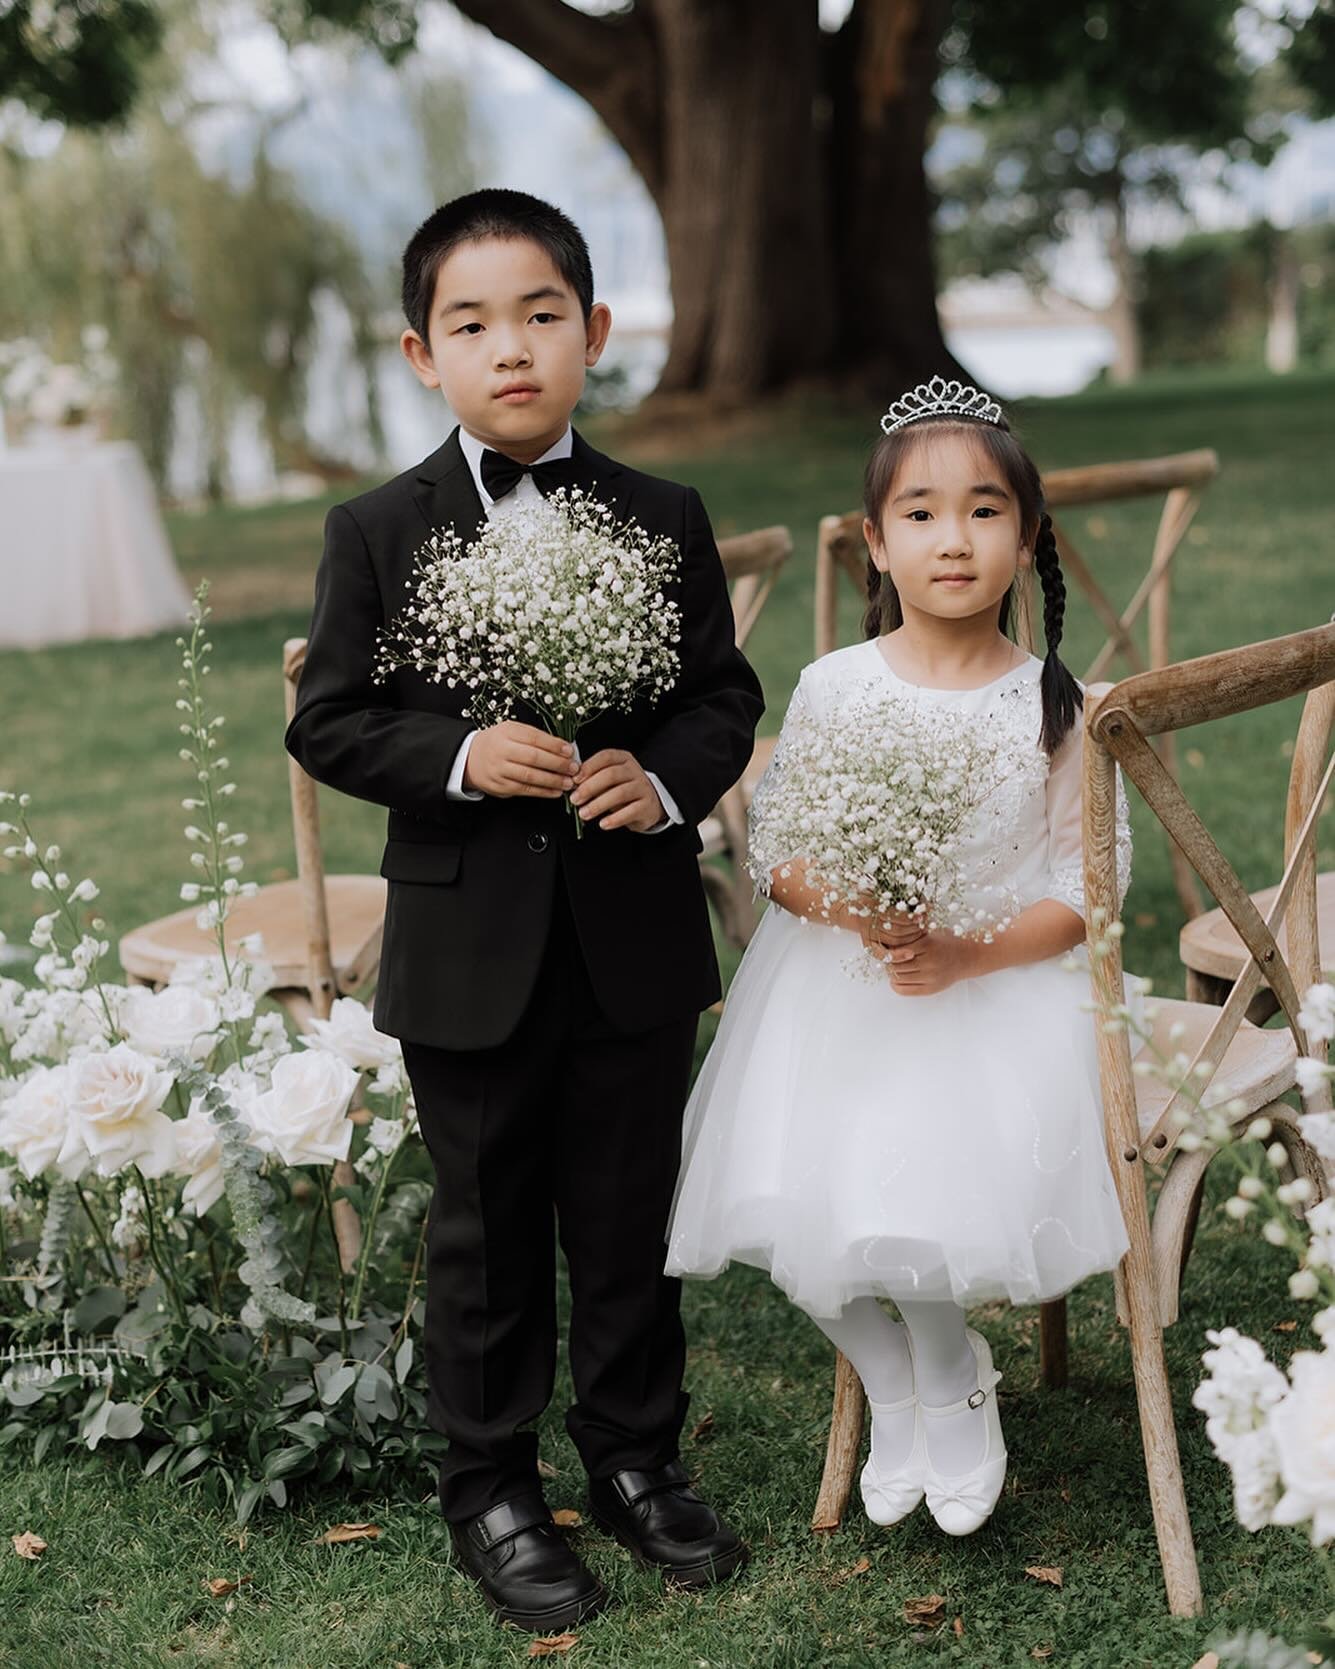 ✨Another precious moment at Brock House✨

We still have available openings for both weddings and corporate events for the 2024 season. 
Contact us via email or DM for details at 💌 brockhouseevents@peakeofcatering.com 

Photographer: @jumistory 
Flor